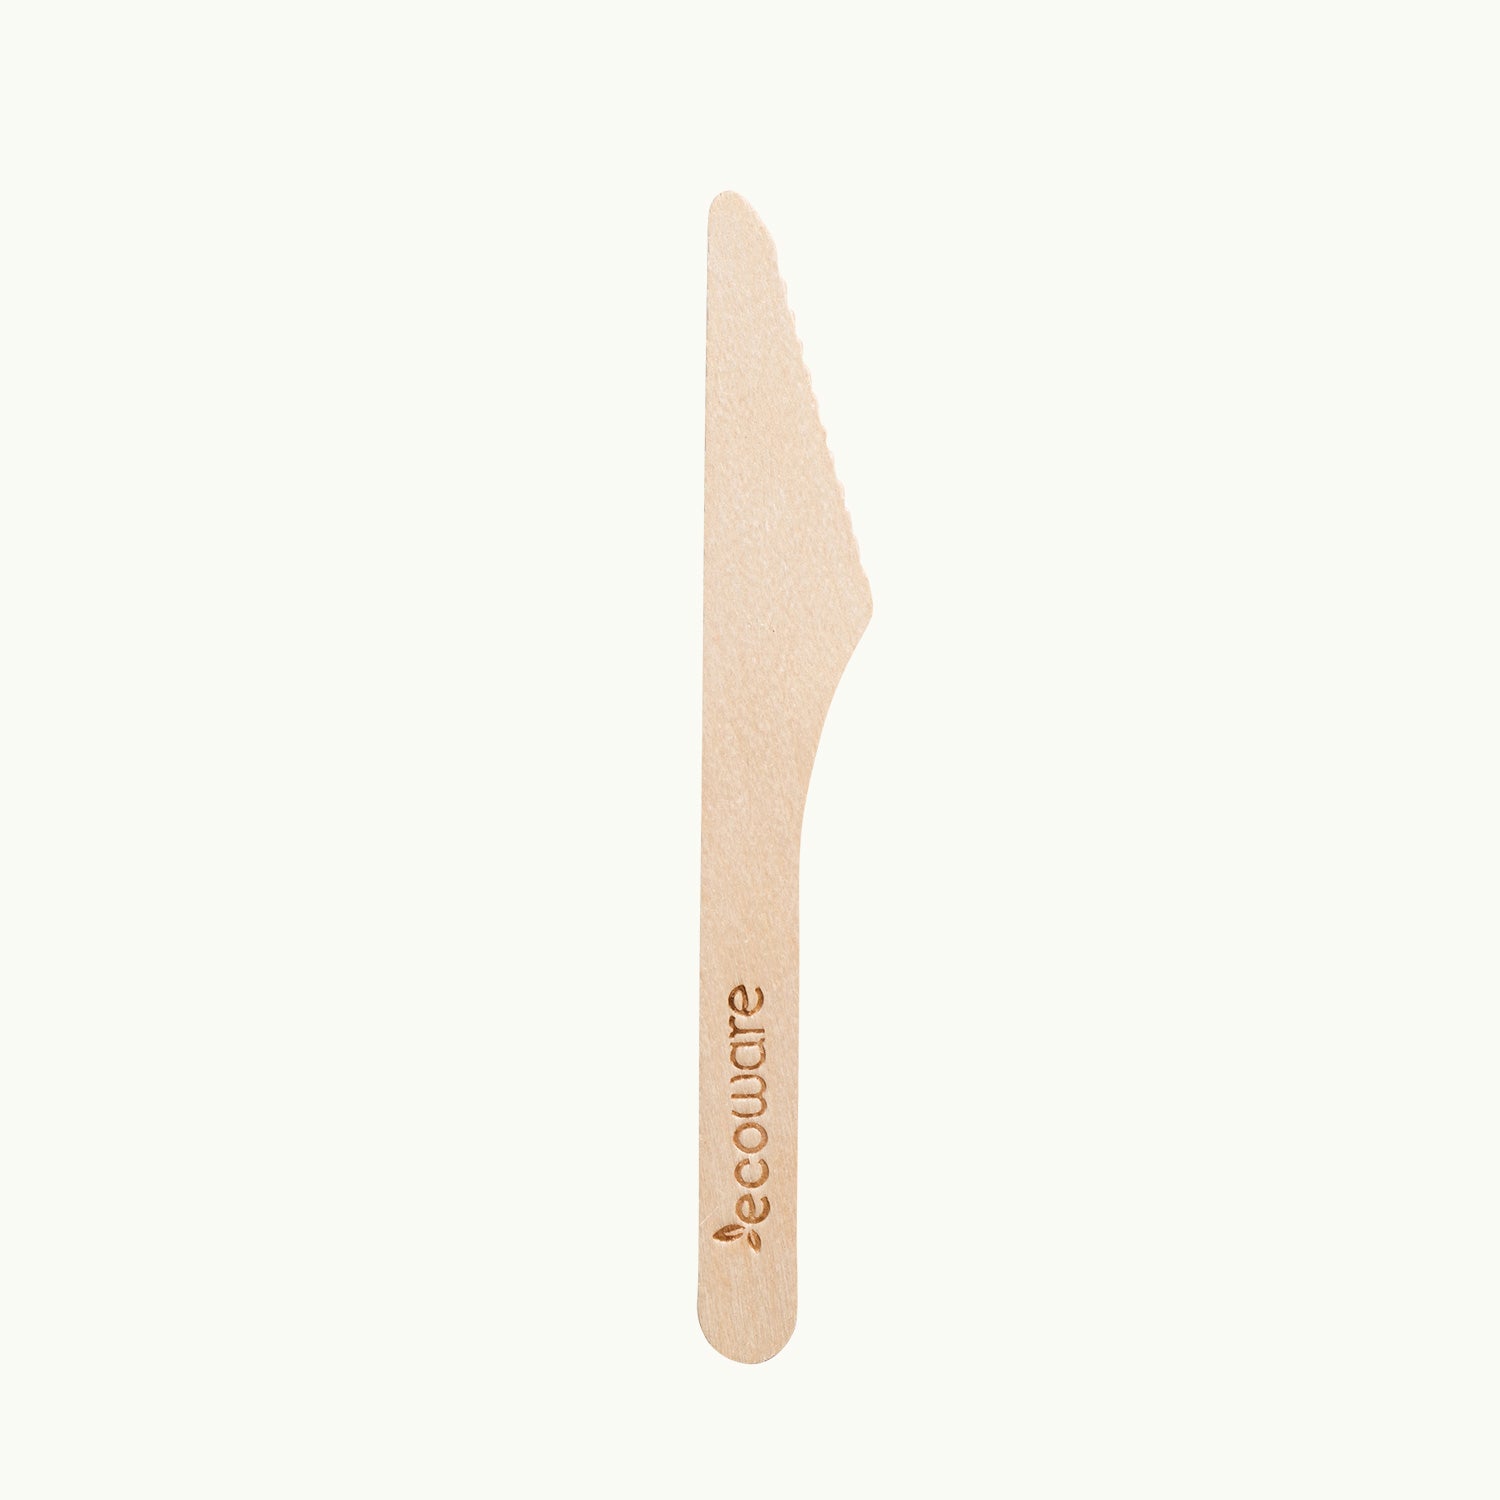 Ecoware biodegradable cutlery knife. The wood cutlery range includes knives, forks, spoons and a wood cutlery set.